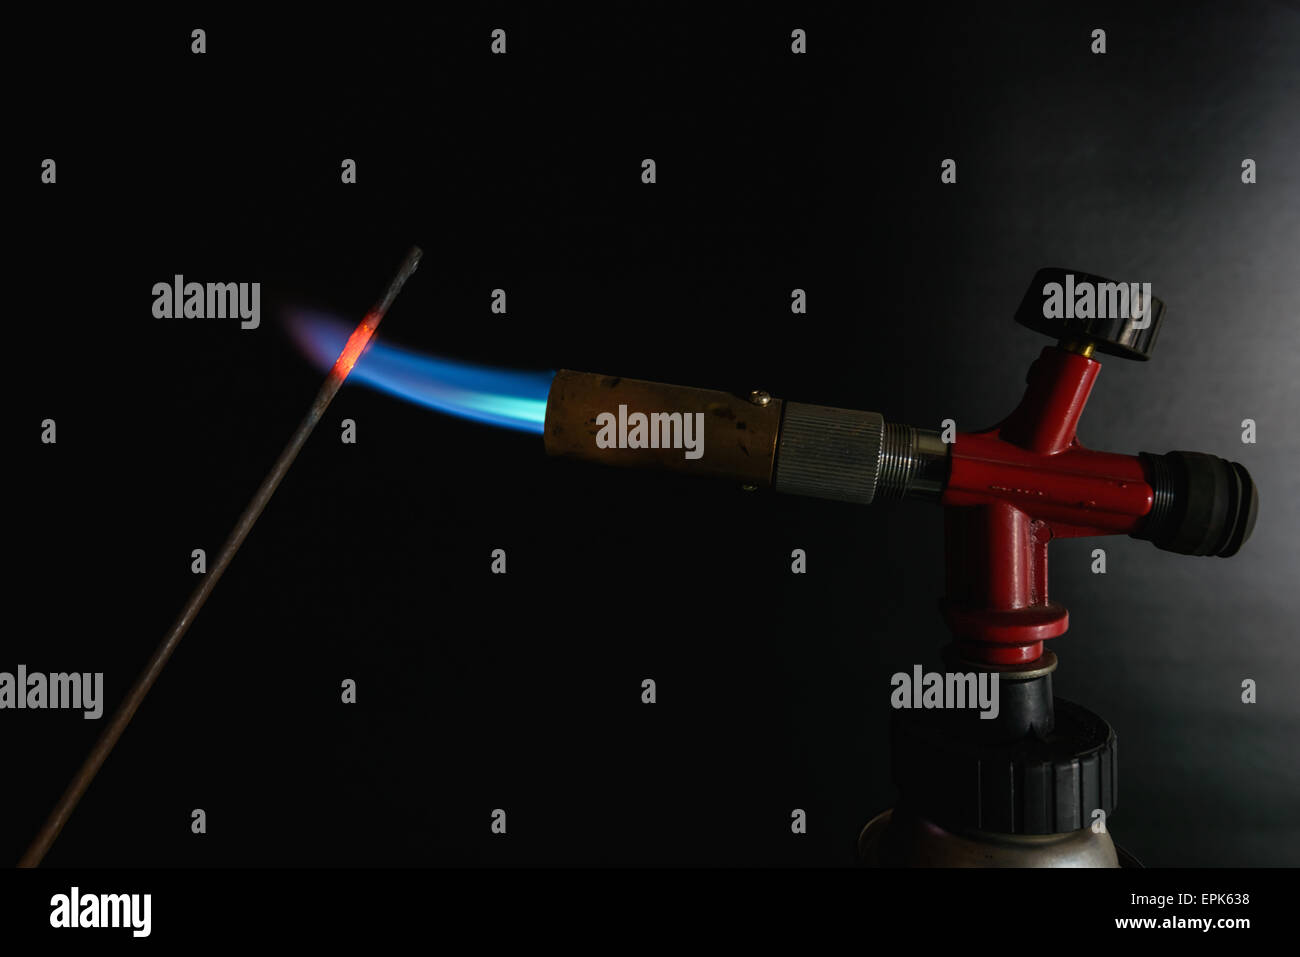 Glass Blowing Artist Forms Blob Glass Vessel Using Gas Torch Stock Photo by  ©mindstorm 224745418